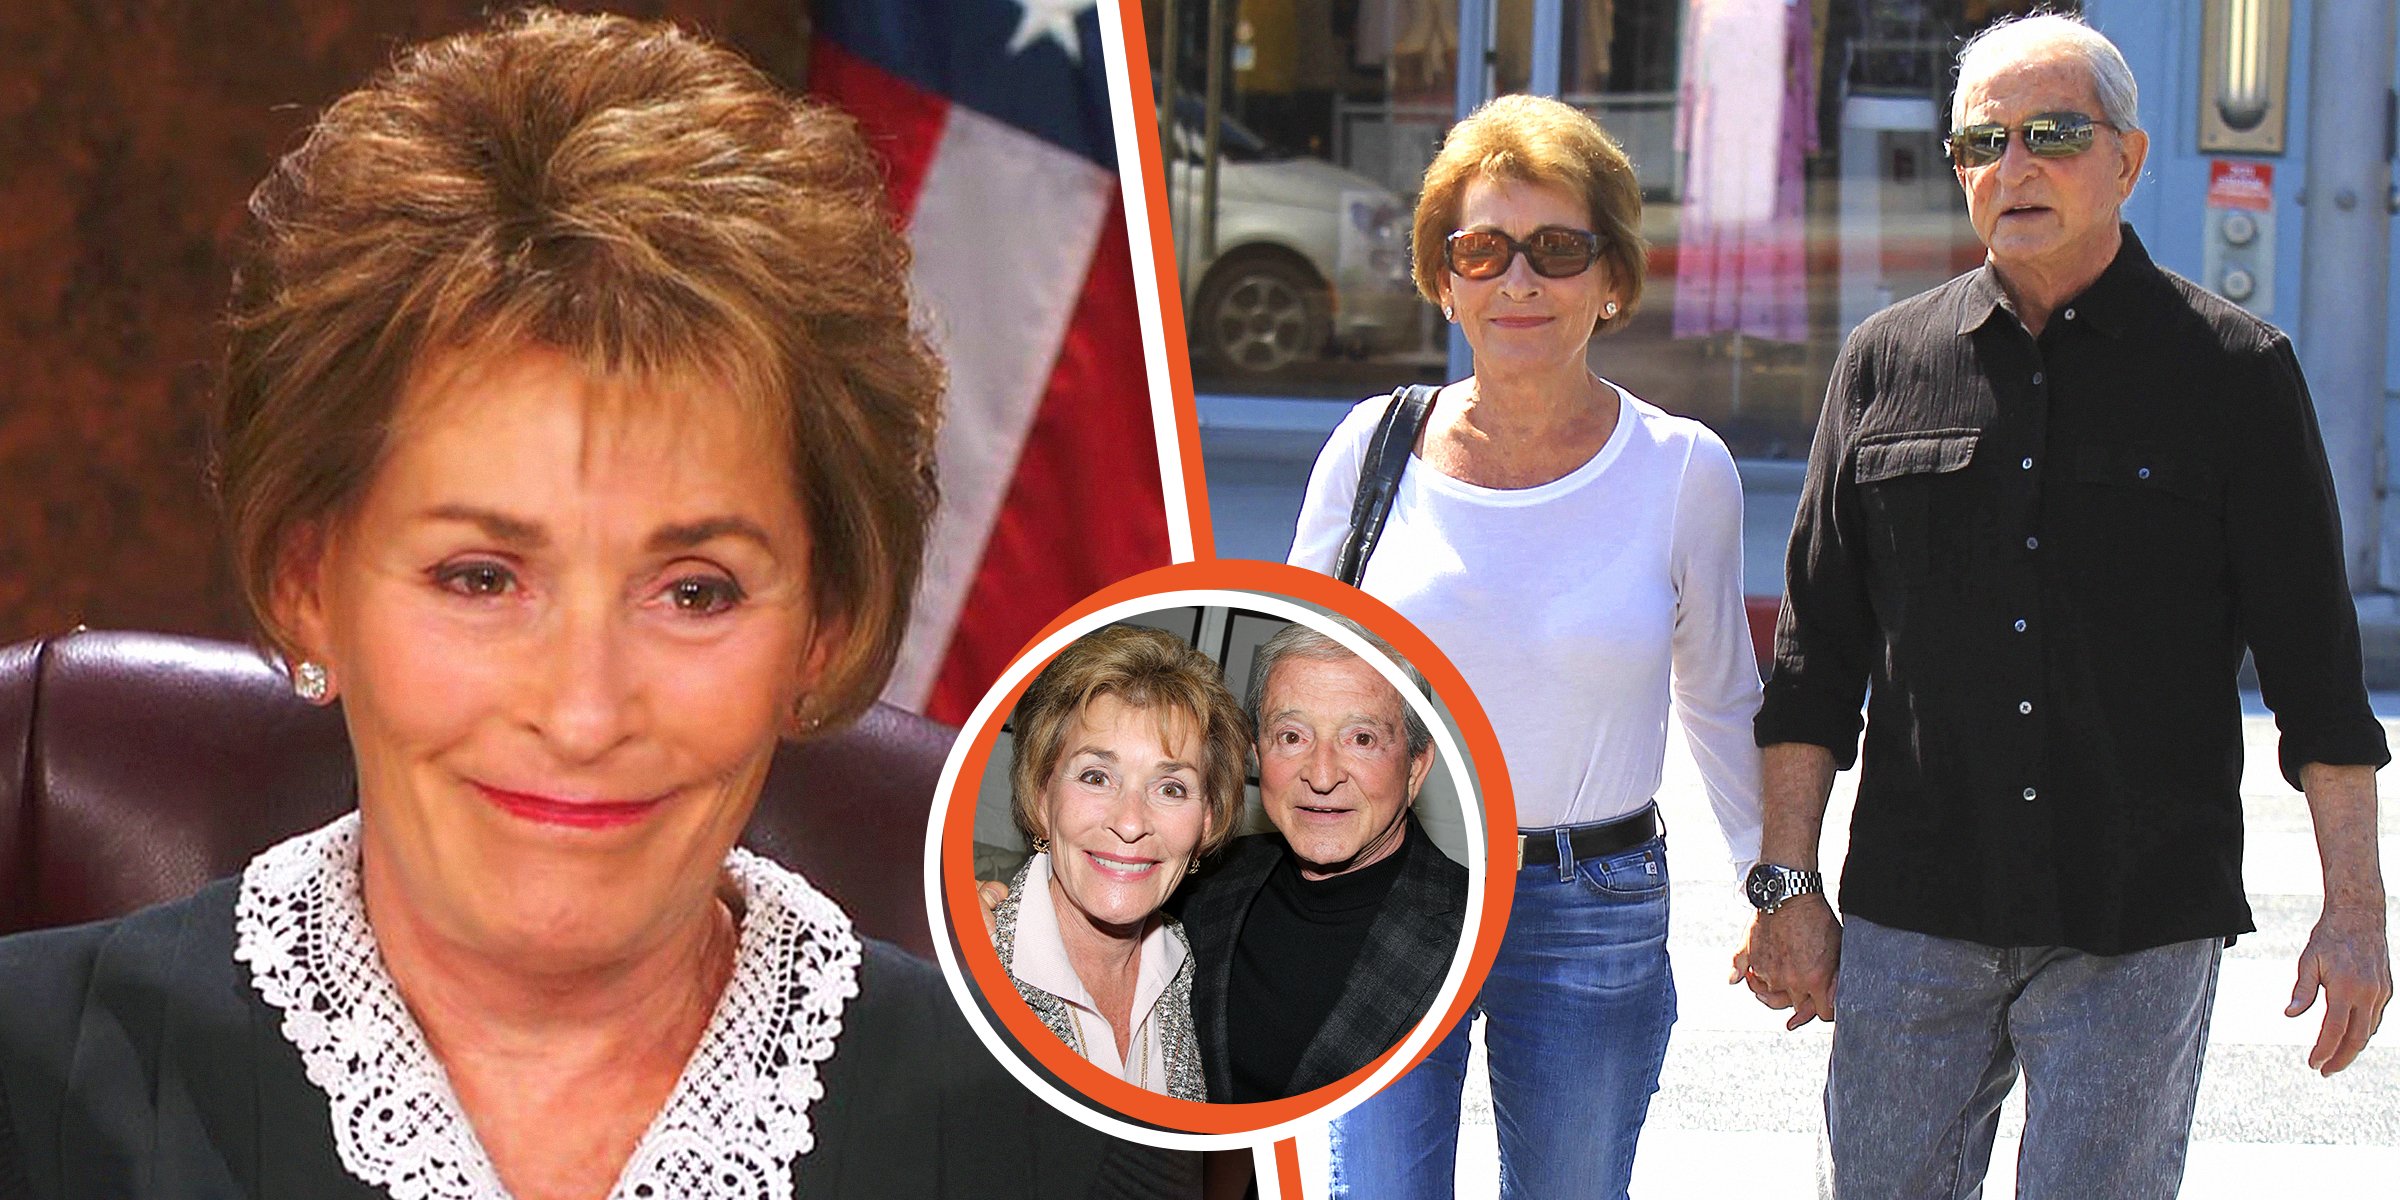 Judge Judy Turned 80 In 2022 — She And Husband Made It To 45 Years After He Felt Uncomfortable